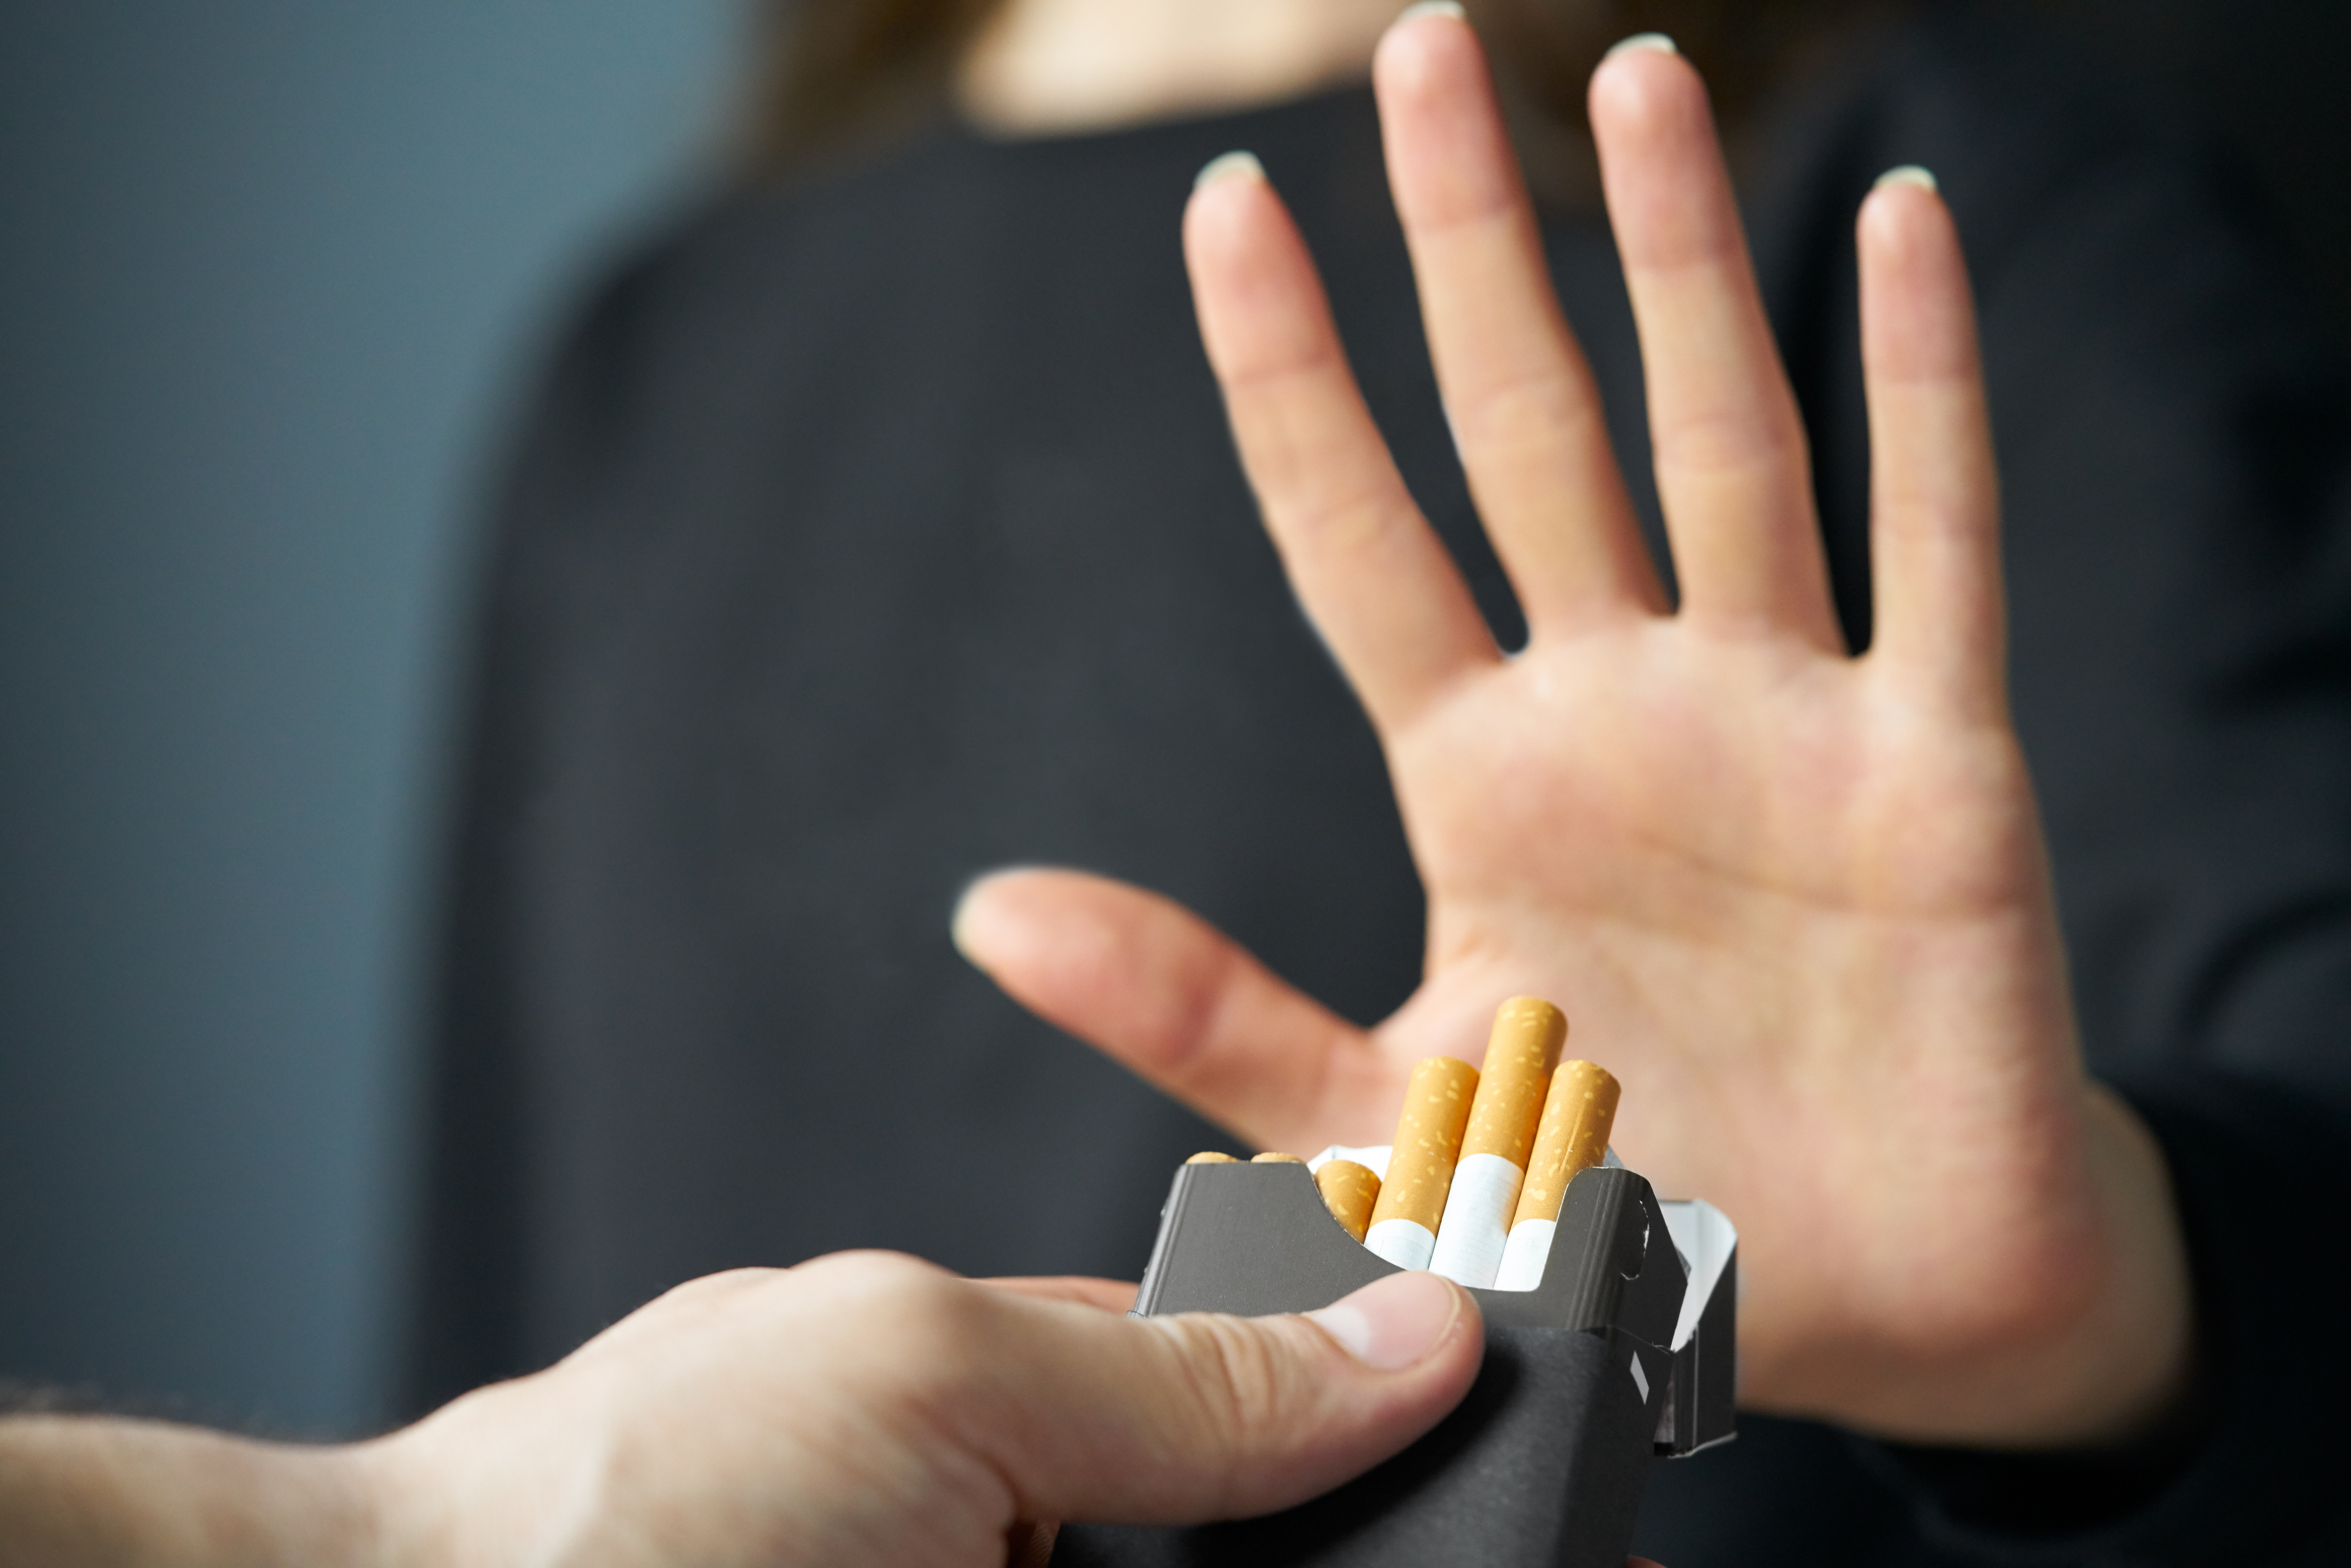 A person putting their hand up to reject an offer of tobacco cigarettes.